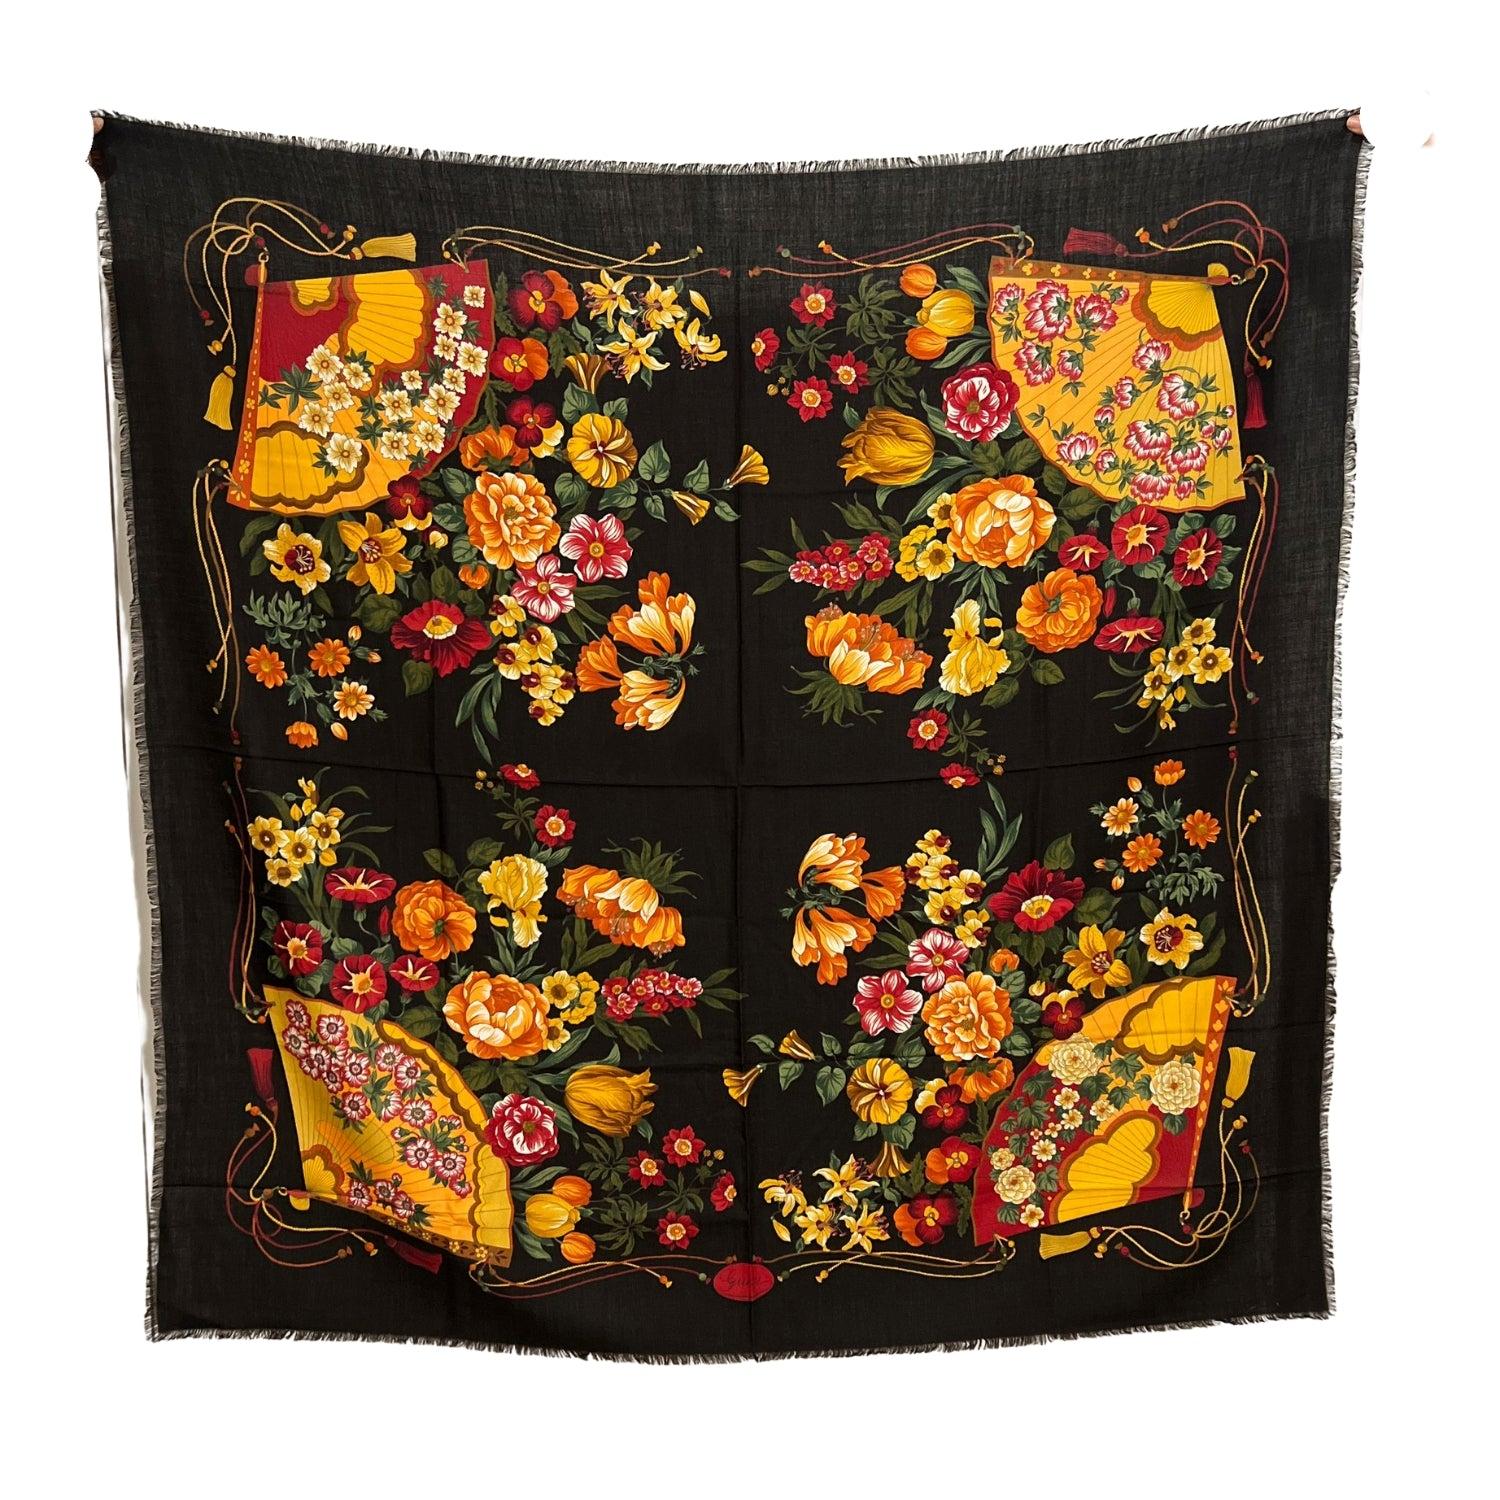 Beautiful Gucci vintage maxi shawl from the 1980s. Composition: 70% wool, 30% Silk. Floral design, with fans. Black background. Composition tag is still attached. Measurements: 54 x 54 inches - 137.2x 137.2 cm Details MATERIAL: Wool COLOR: Black